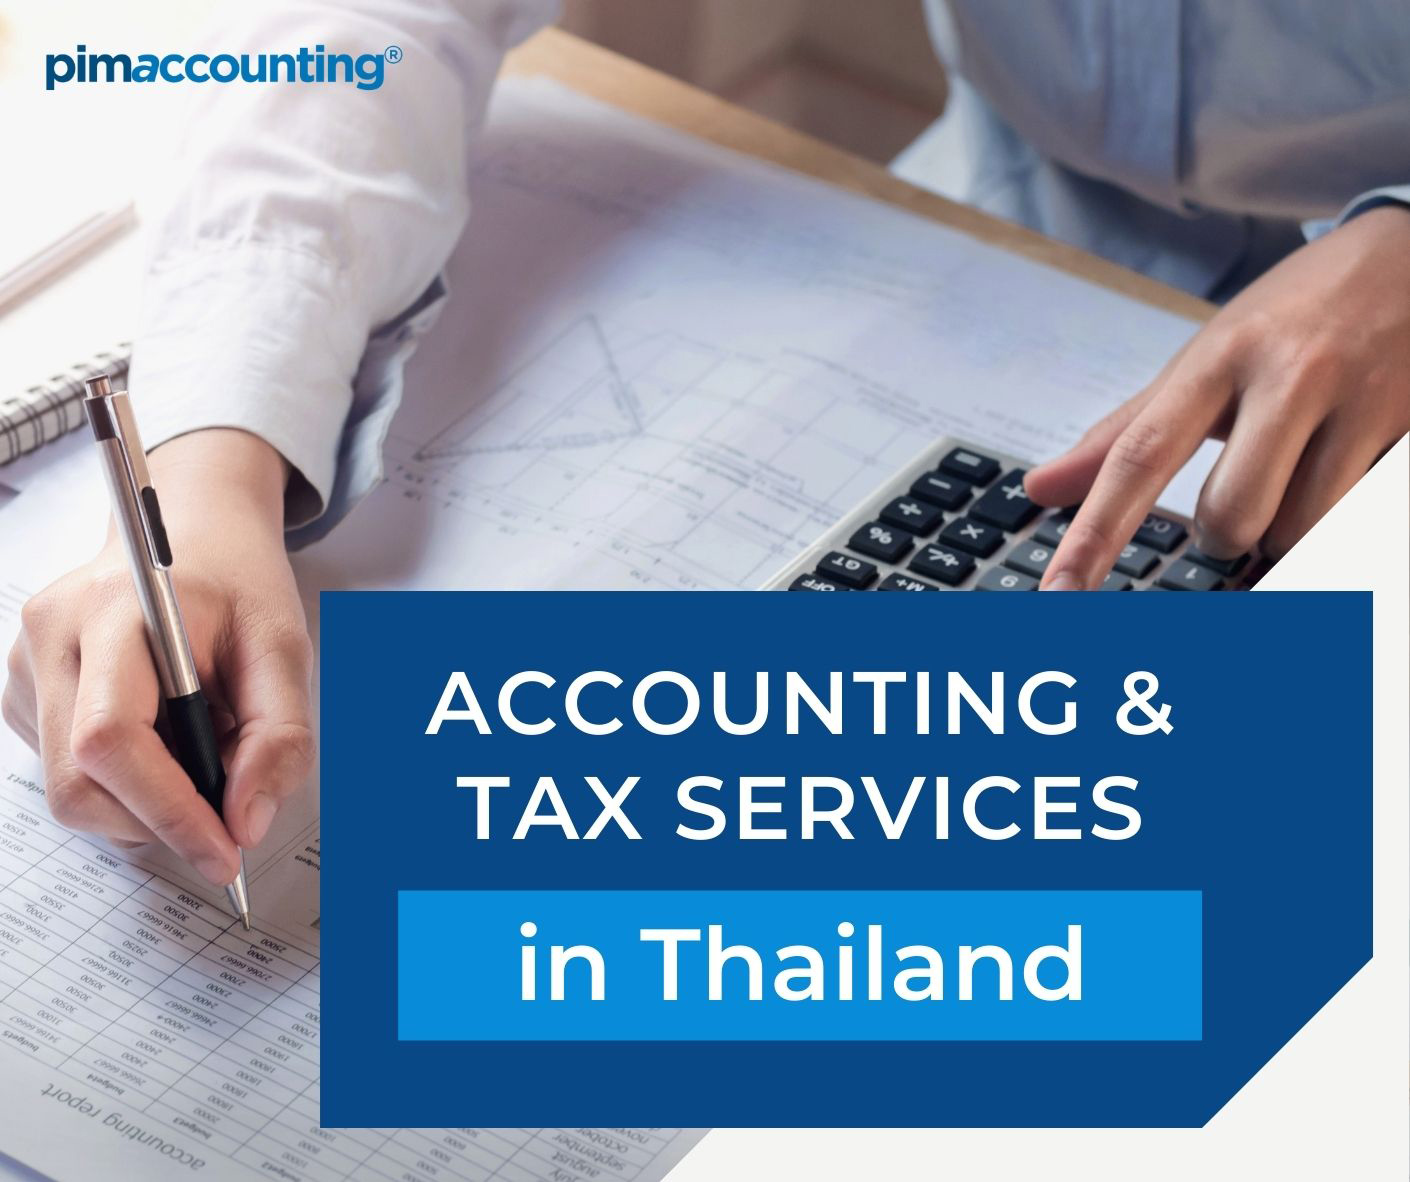 Accounting & Tax Services in Thailand